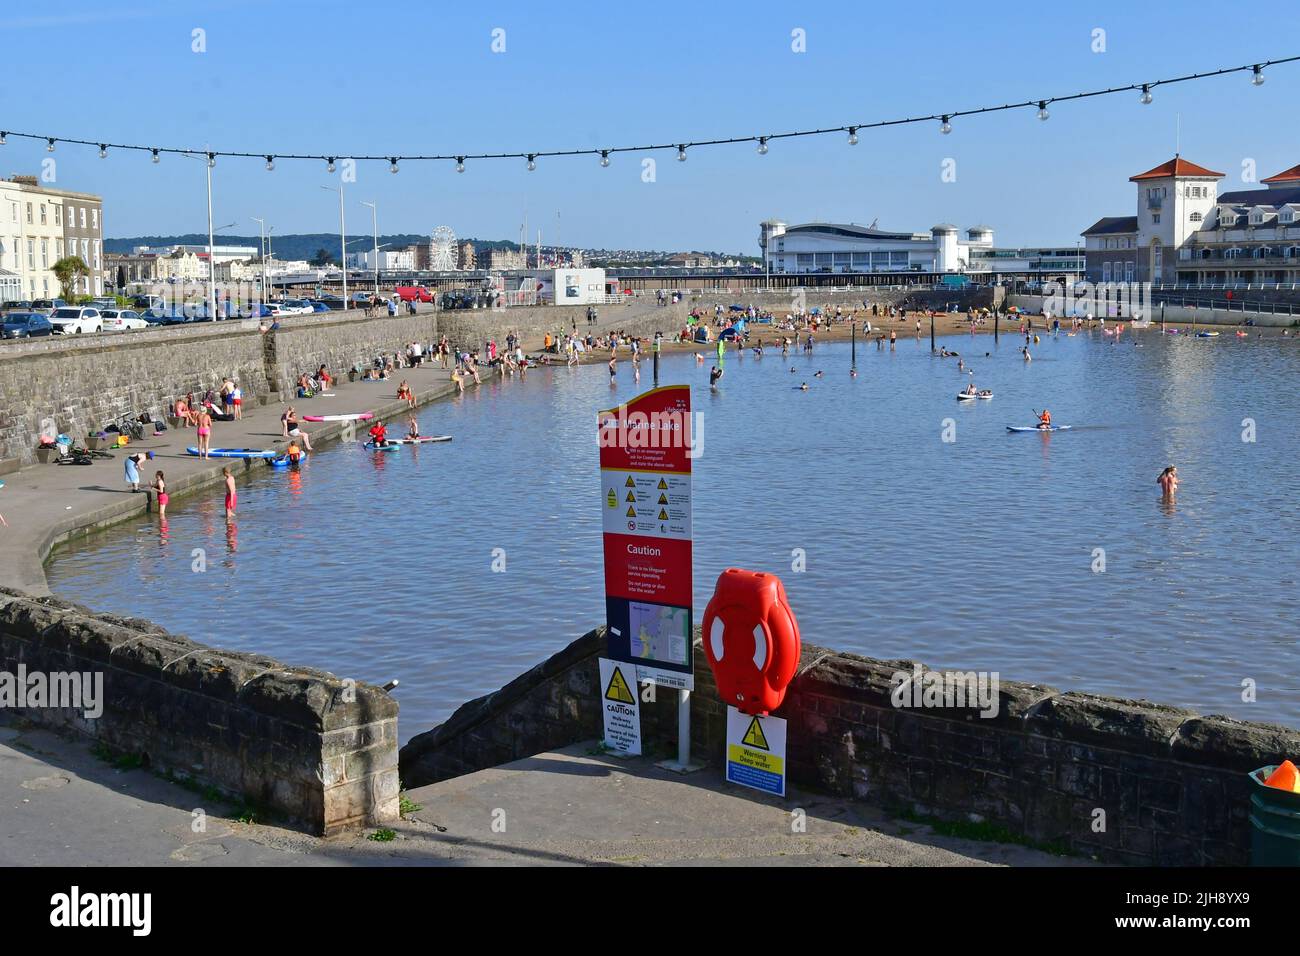 Weston Super Mare, UK. 16th July, 2022. UK Heatwave. People enjoying the Newly Dredged Marine Lake which is filled twice a day by the in coming sea tides. Picture Credit: Robert Timoney/Alamy Live News Stock Photo